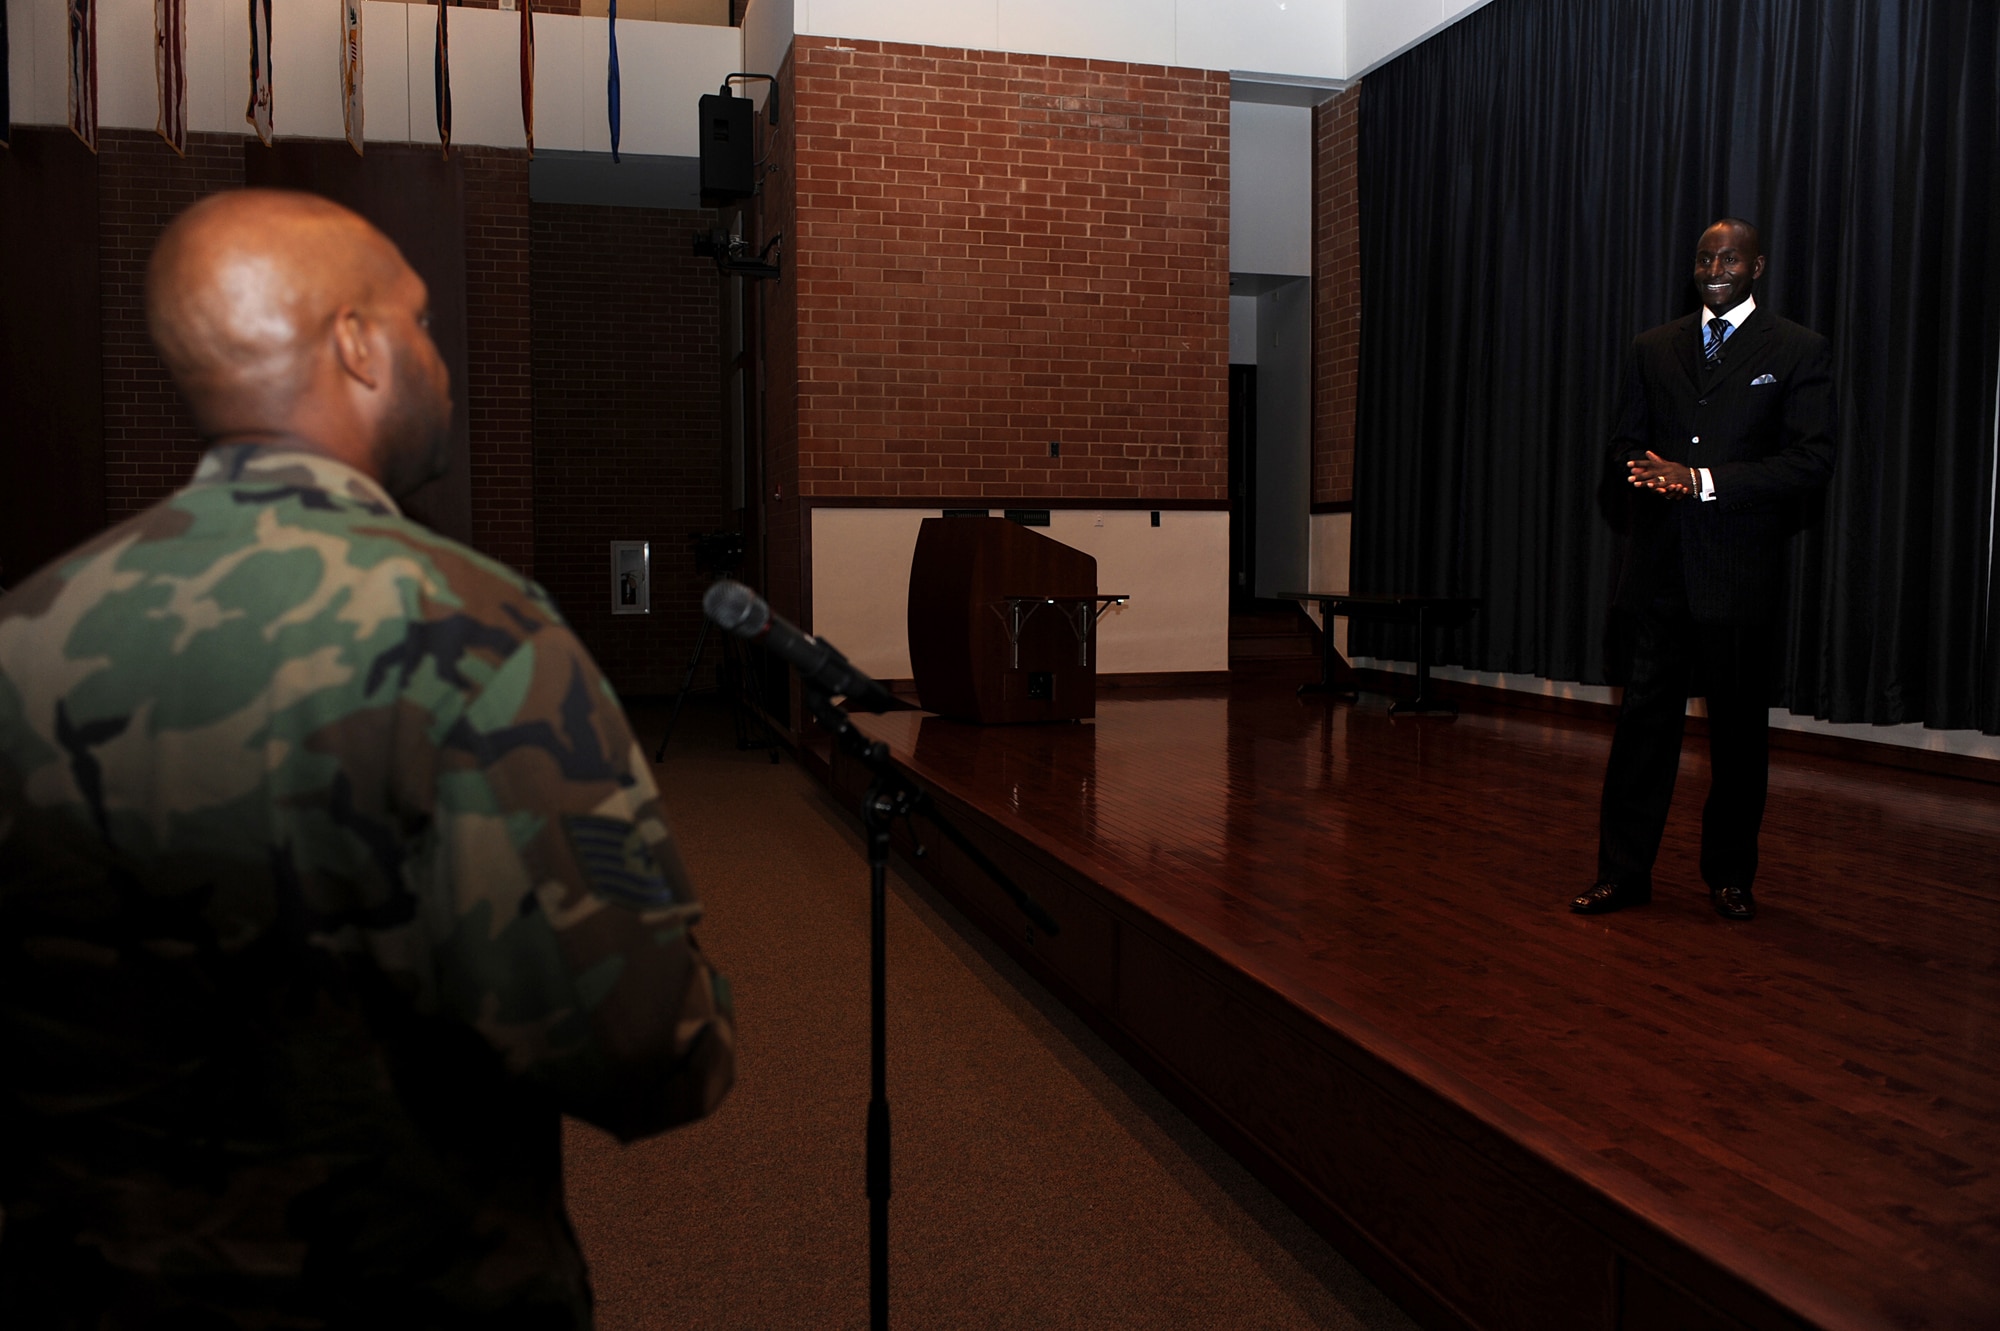 Dr. Randal Pinkett answers a question from Technical Sgt. Kendrick Ross, Community College of the Air Force affiliated schools liaison, after 45 minutes of motivational remarks to the crowd assembled in Grace Peterson Hall Aug. 12 at the U.S. Air Force Expeditionary Center on the Fort Dix section of Joint Base McGuire-Dix-Lakehurst, N.J.  Dr. Pinkett, an entrepreneur, author, Rhodes scholar and winner of the Season 4 reality show, The Apprentice, was the third in a series of professional development speakers helping the Center celebrate its 15th Anniversary. (U.S. Air Force Photo/Staff Sgt. Nathan G. Bevier) 